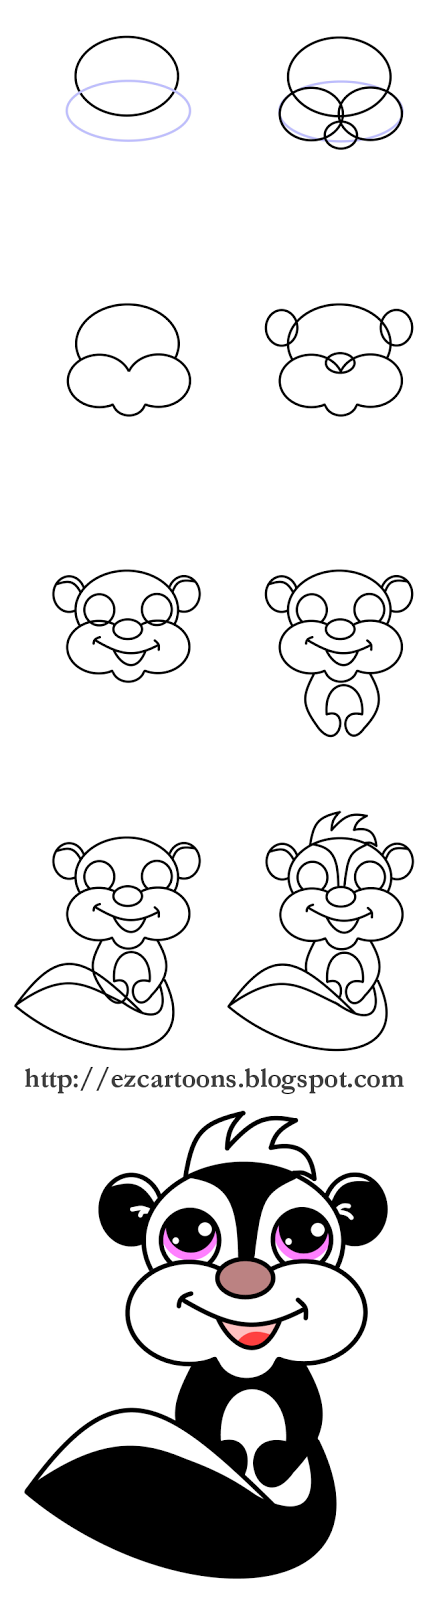 Easy To Draw Cartoons: How To Draw A Skunk